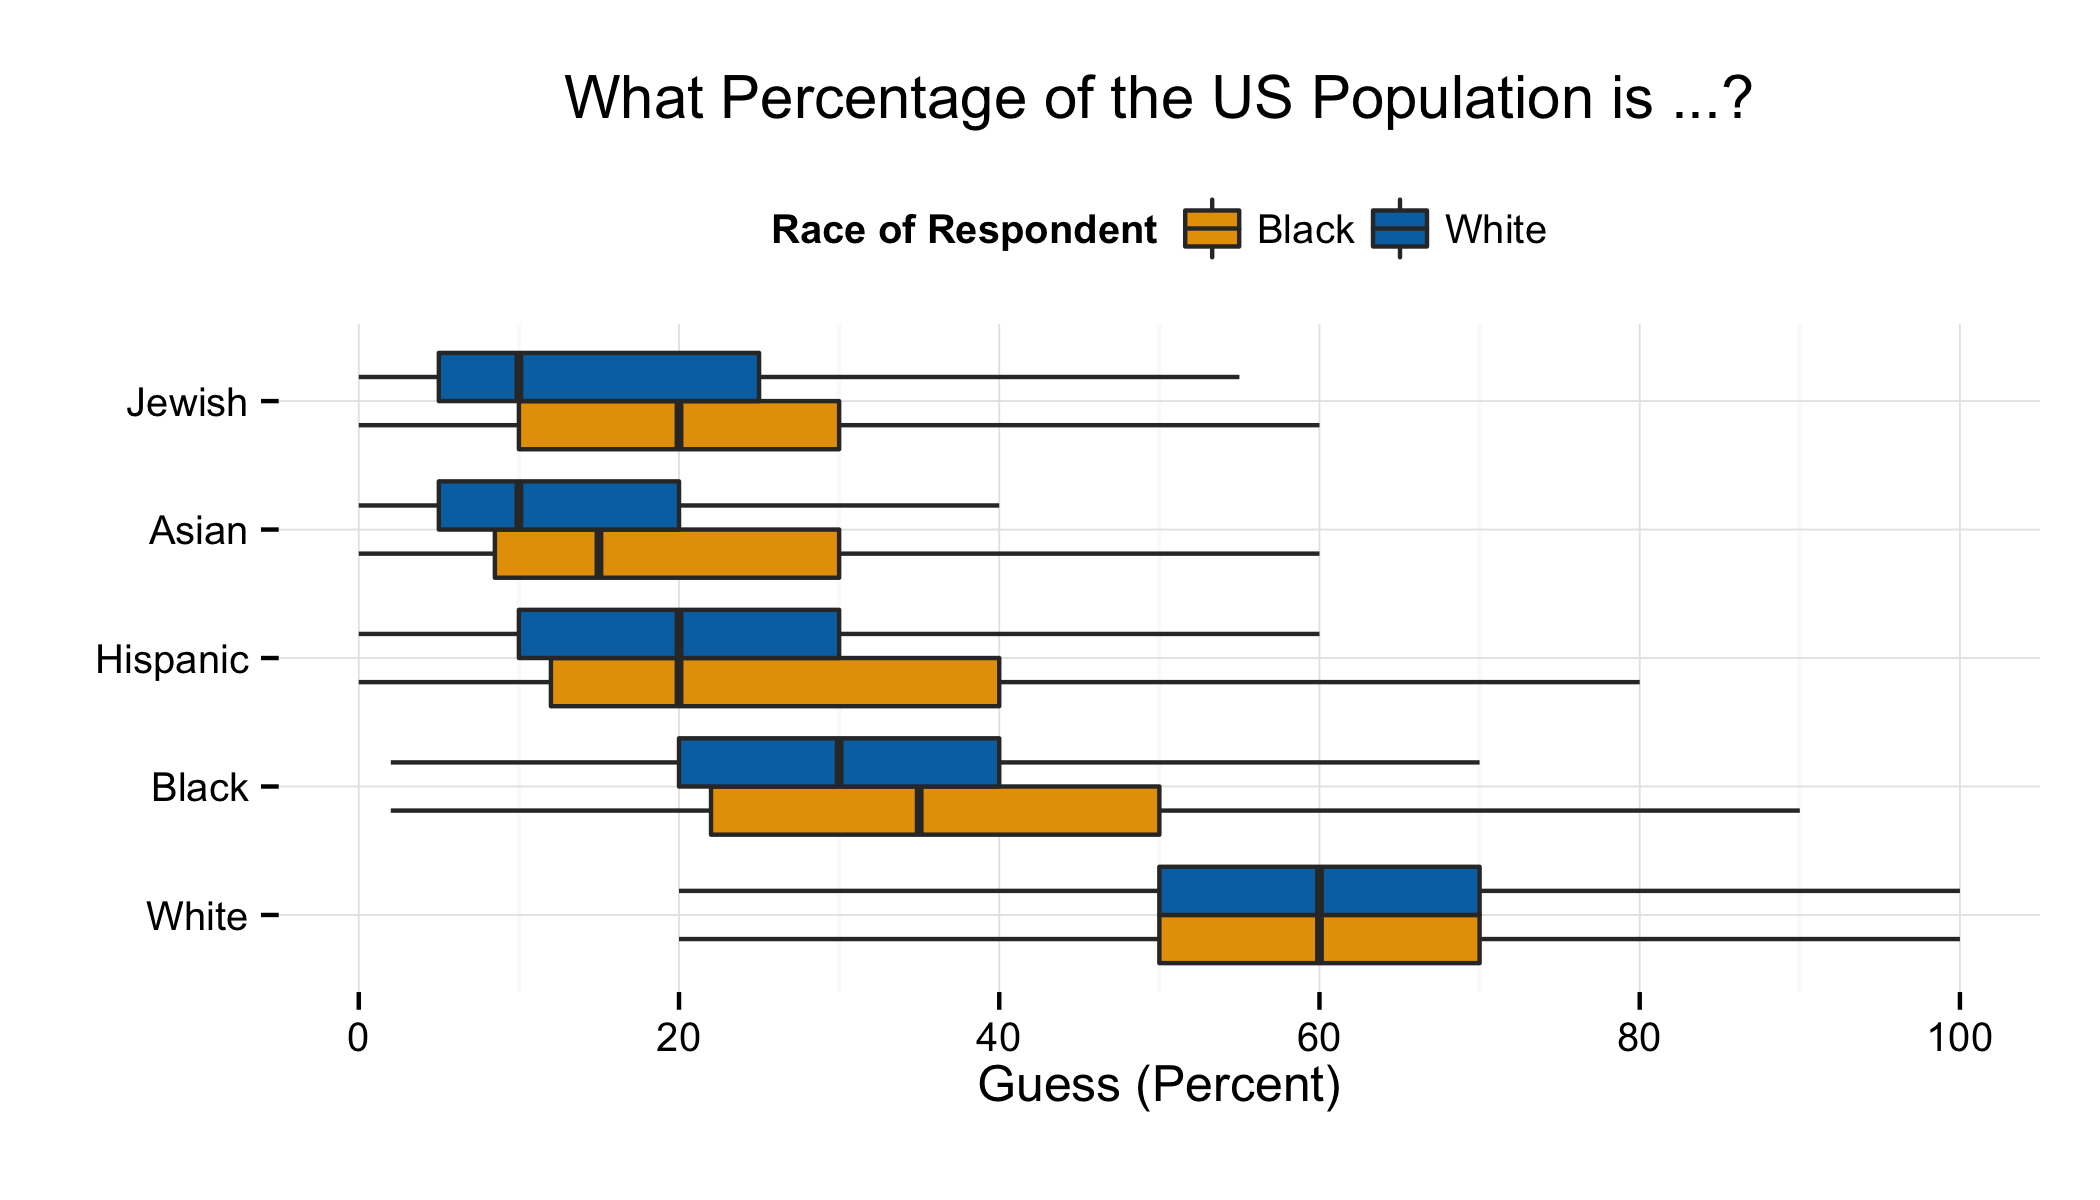 Estimates of racial and ethnic composition, by race.